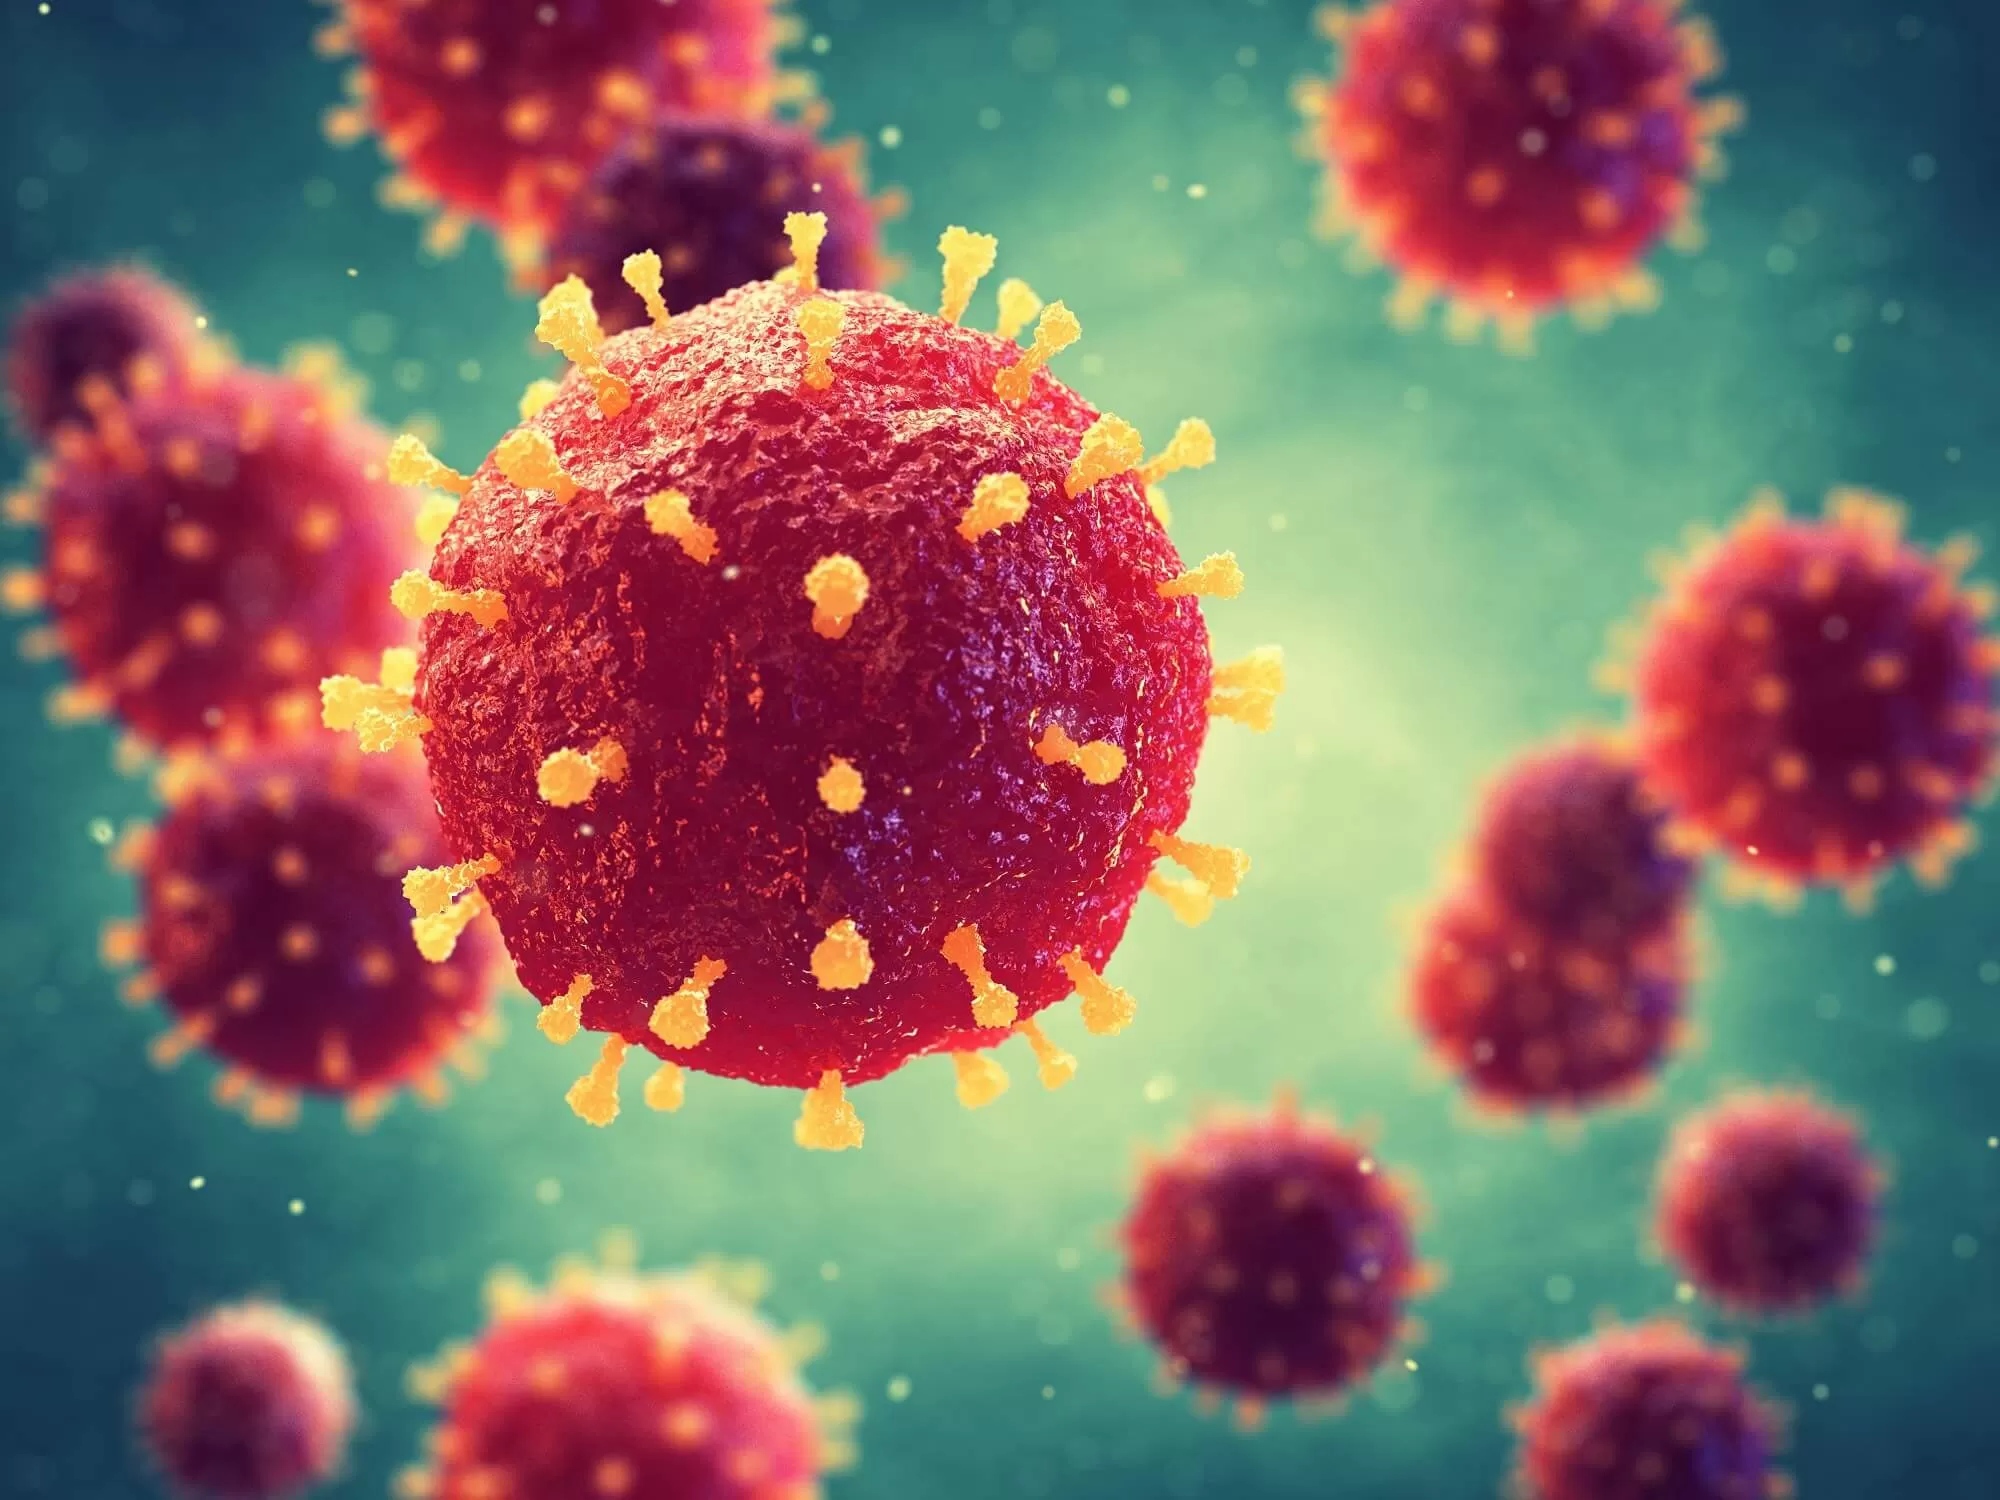 You can help fight the coronavirus by playing this game